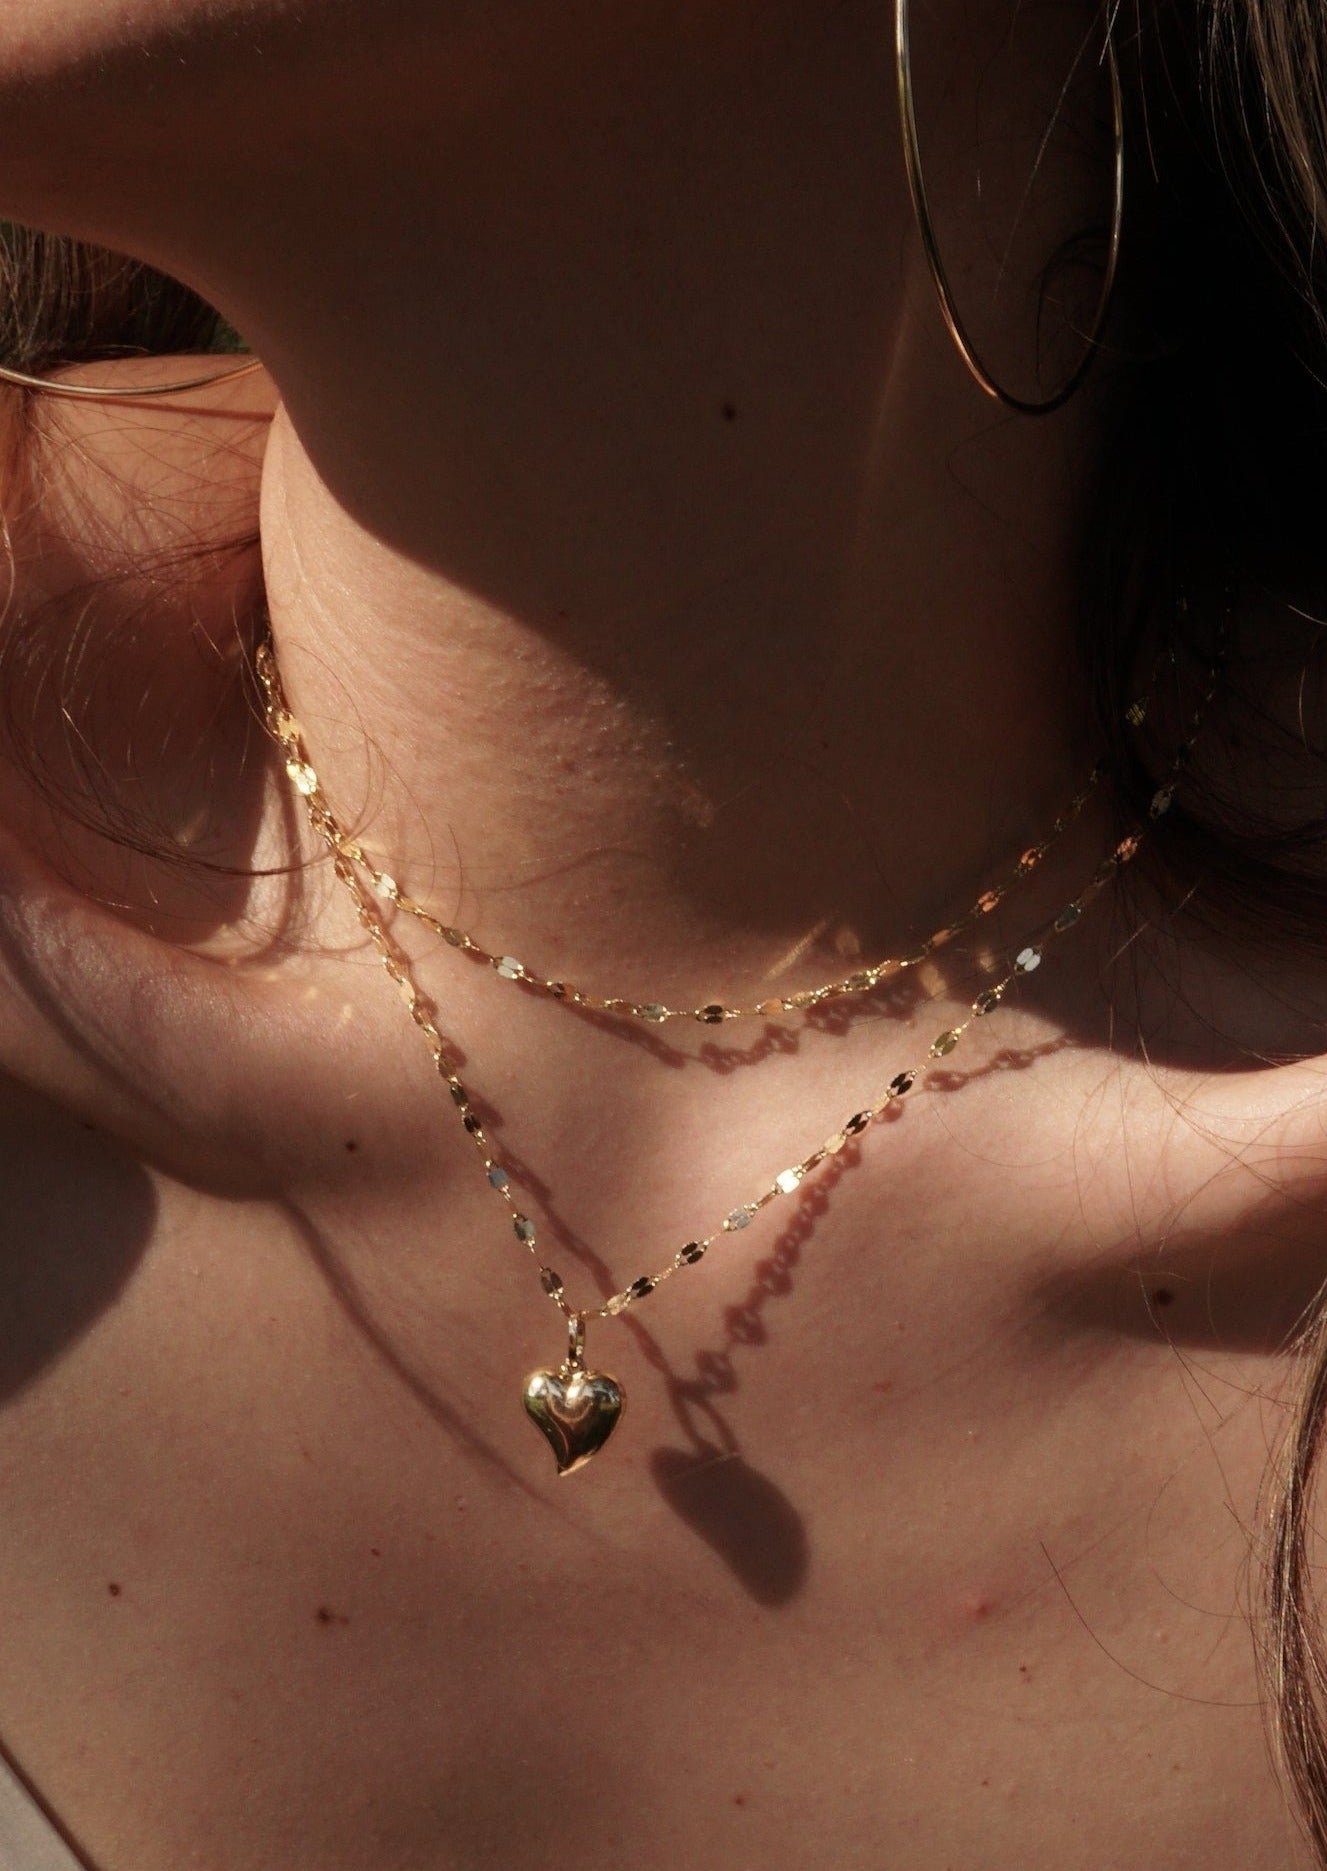 14k Gold Thicker Twinkle Chain